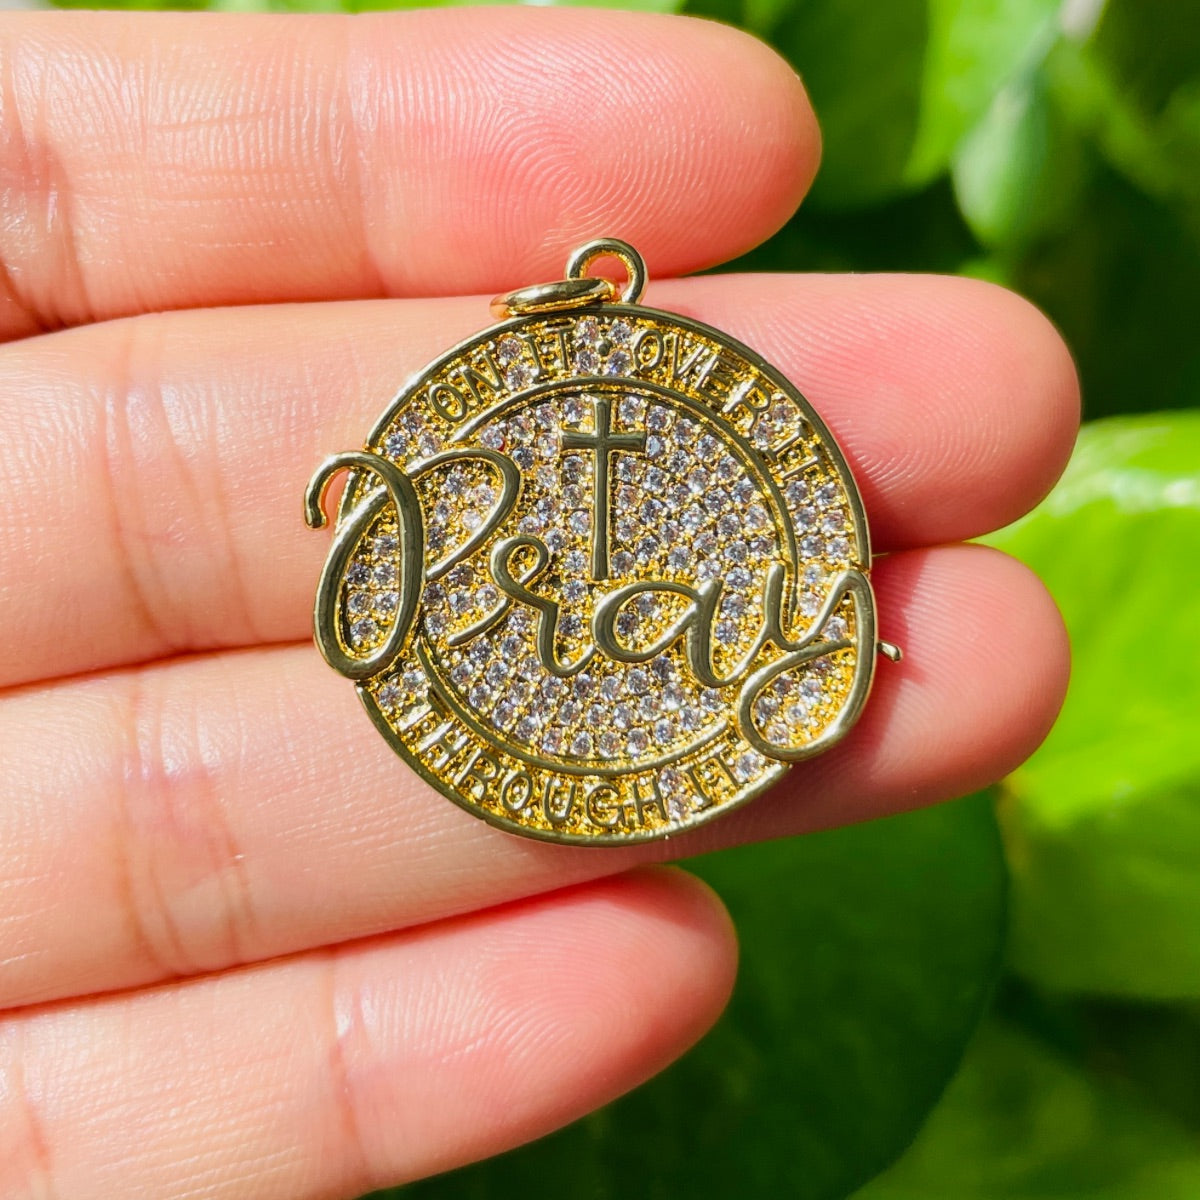 10pcs/lot 28mm CZ Pave Round Plate PRAY ON IT OVER IT THROUGH IT Quote Charms Gold CZ Paved Charms Christian Quotes Discs On Sale Charms Beads Beyond